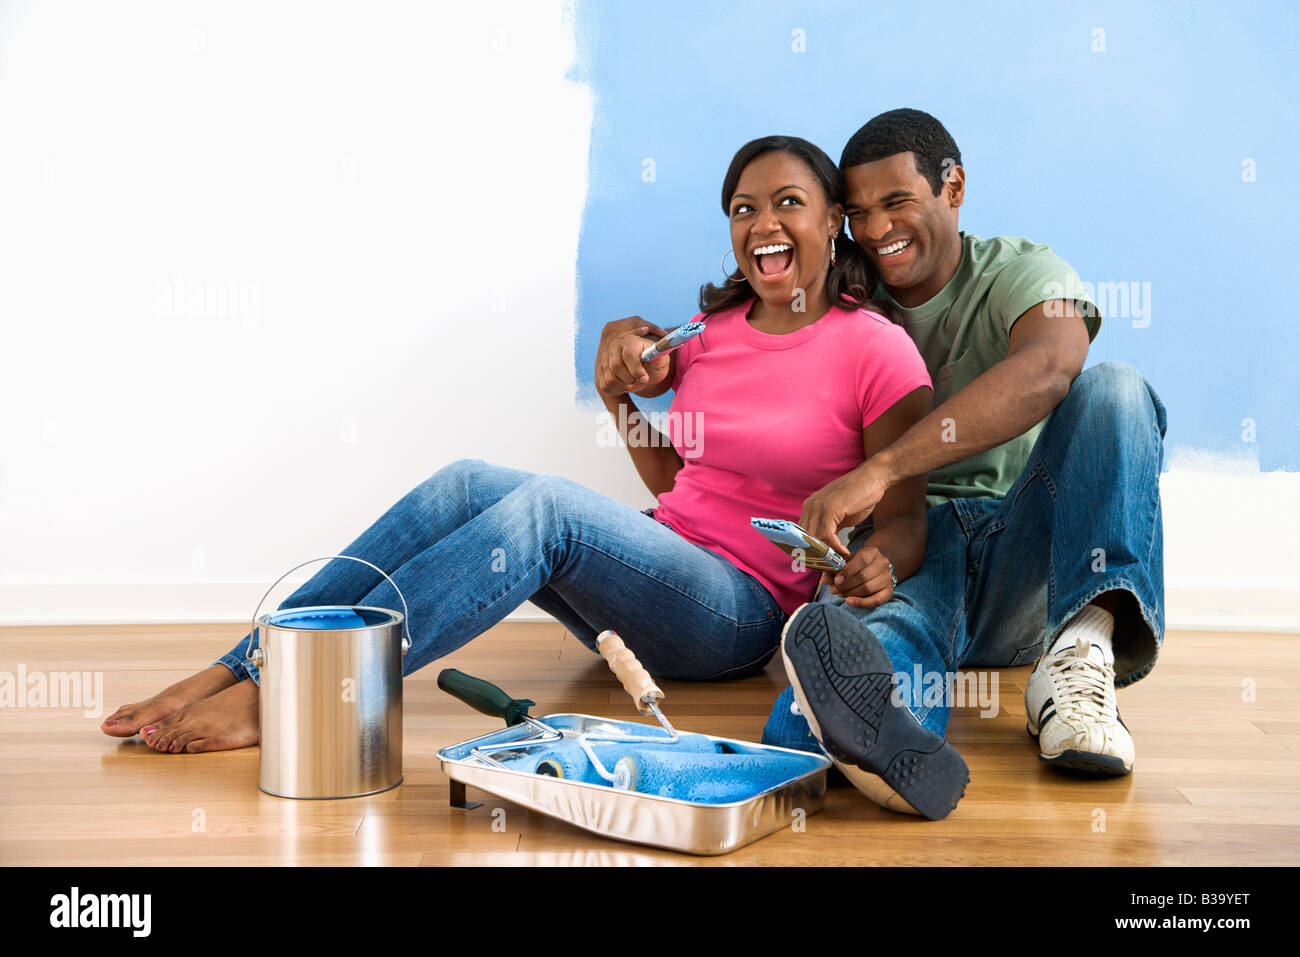 African American couple sitting together relaxing next to half painted wall and painting supplies Stock Photo